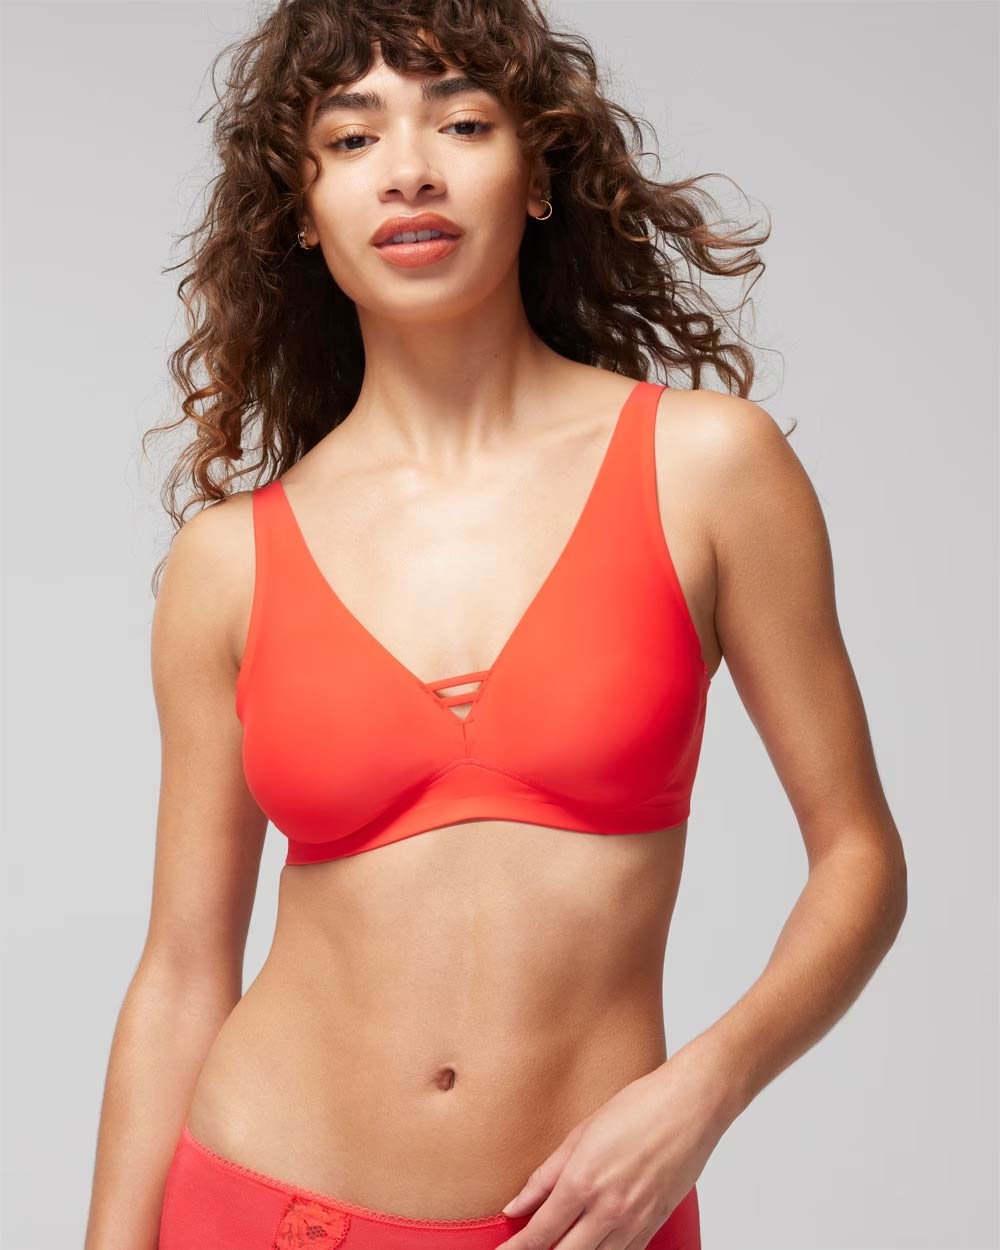 Soma Intimates - It's here! Introducing Lightest Lift™